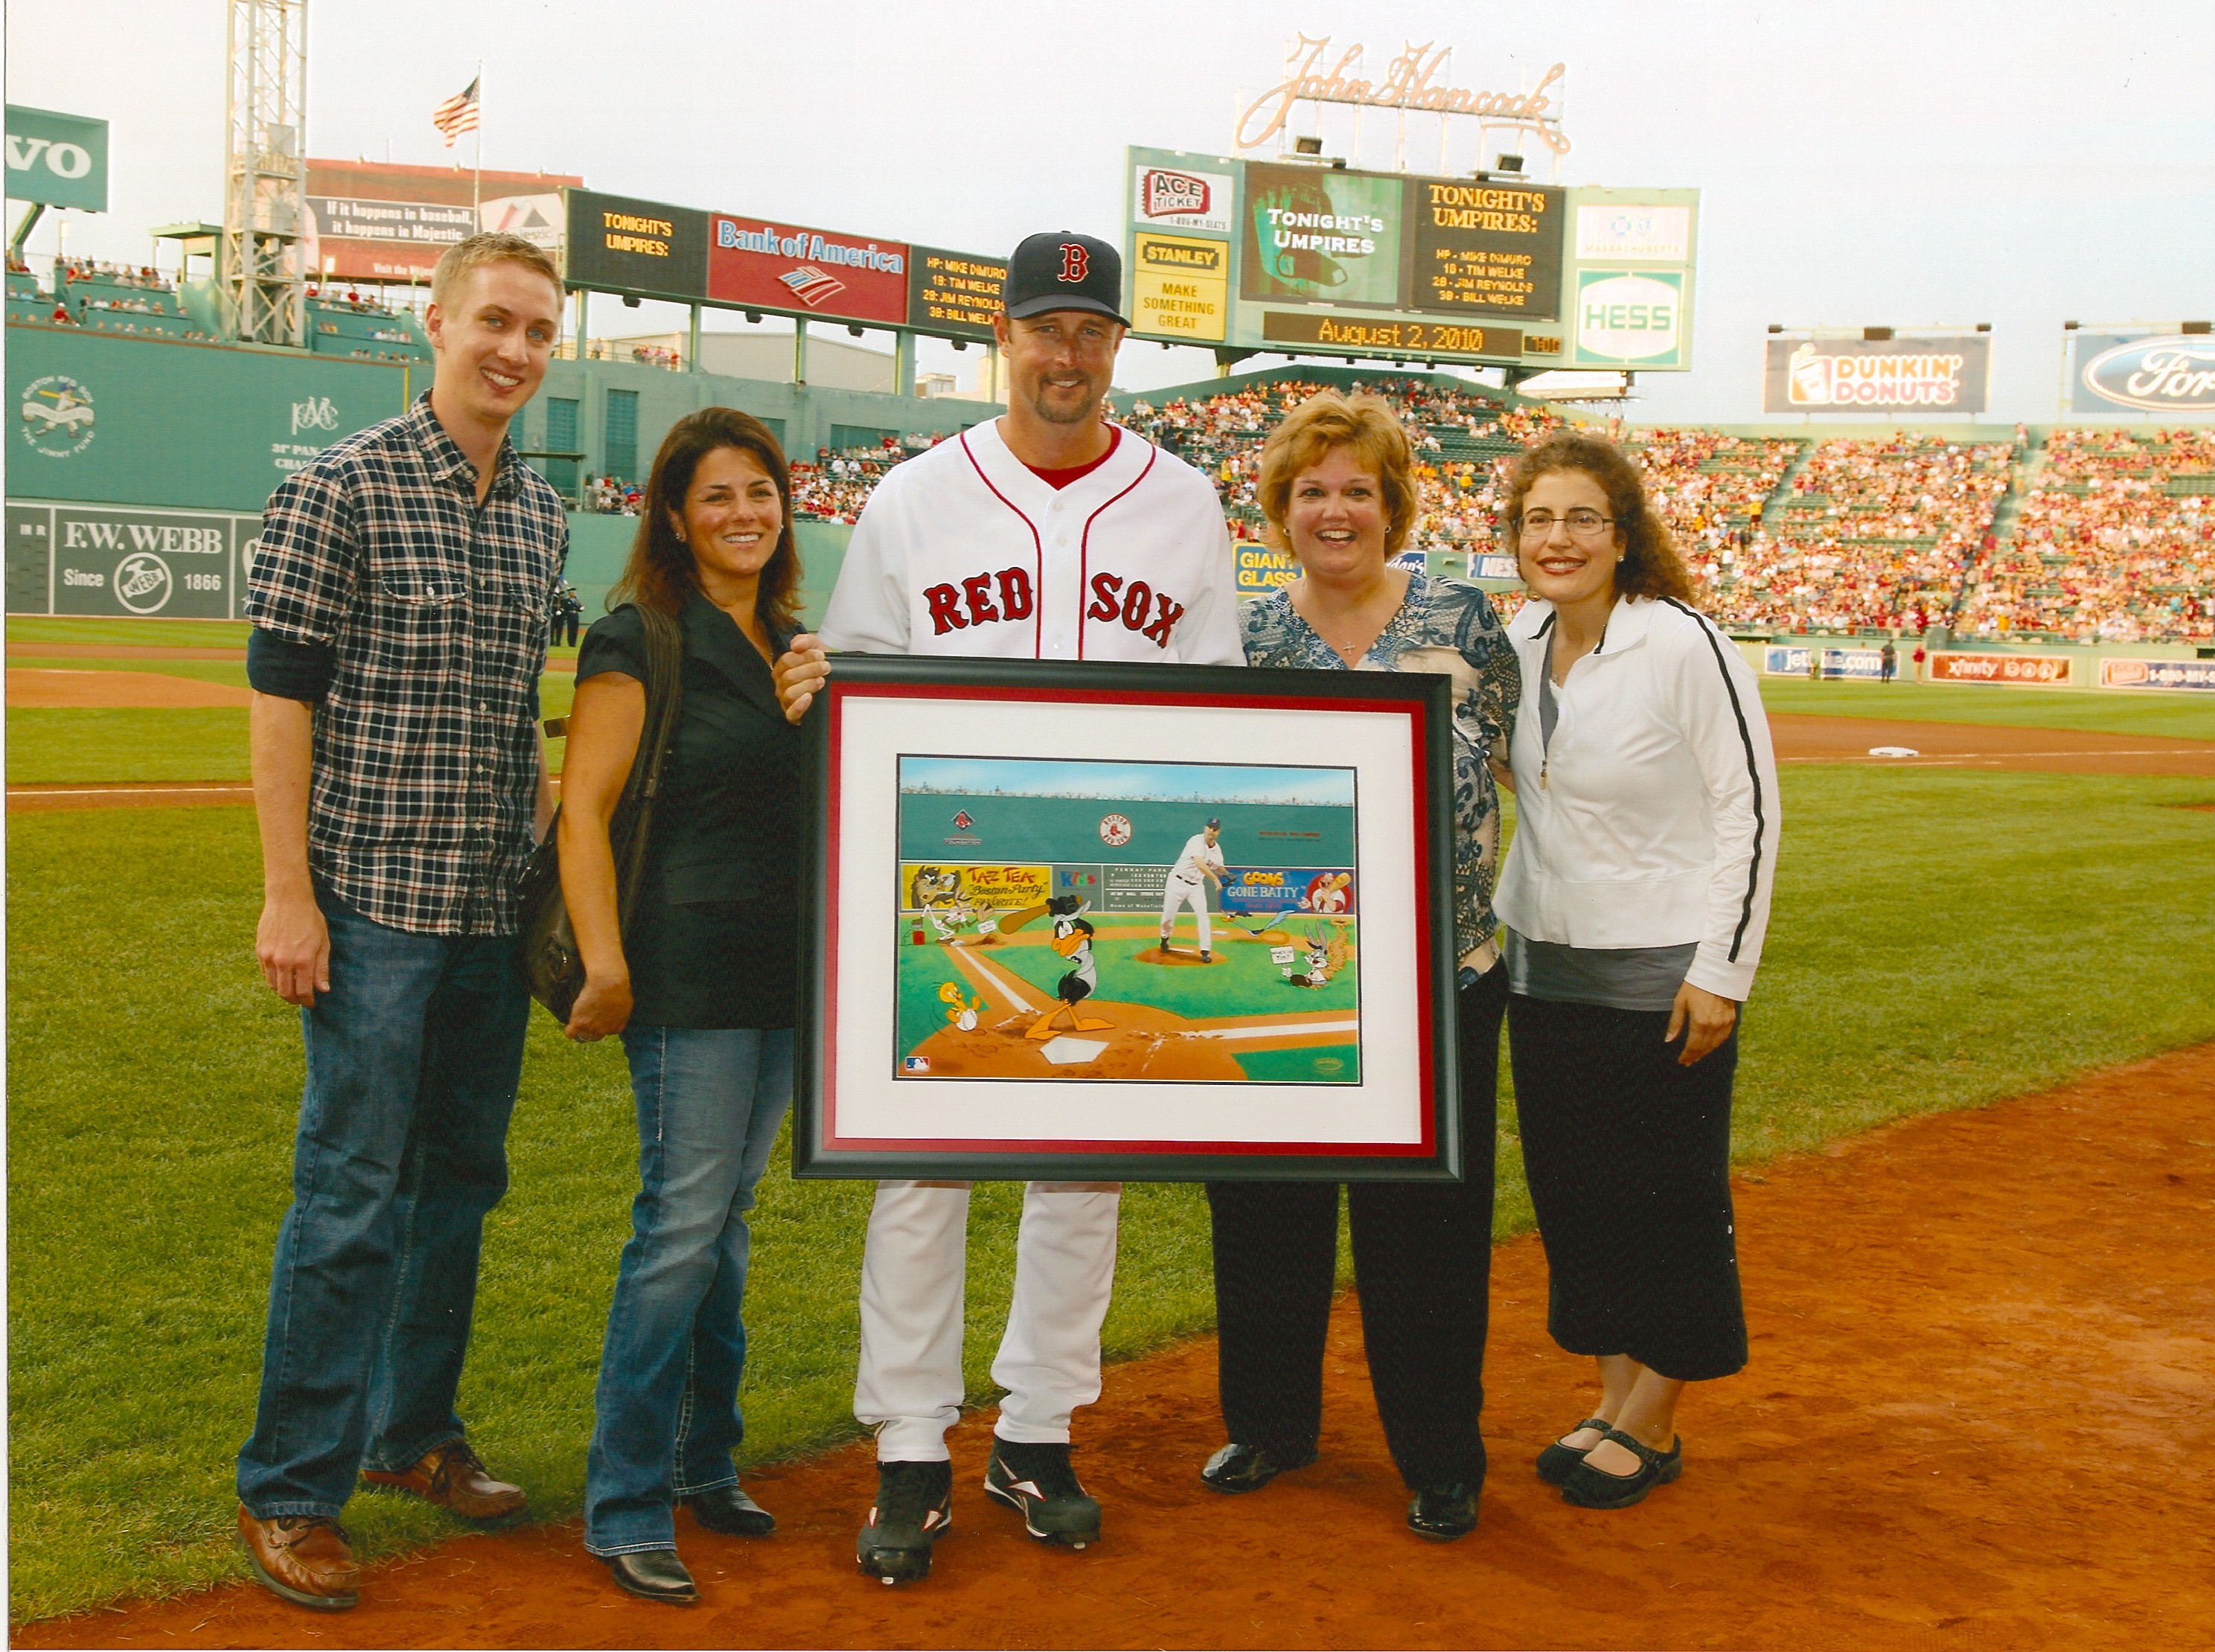 The presentation at Fenway Park on August 2nd